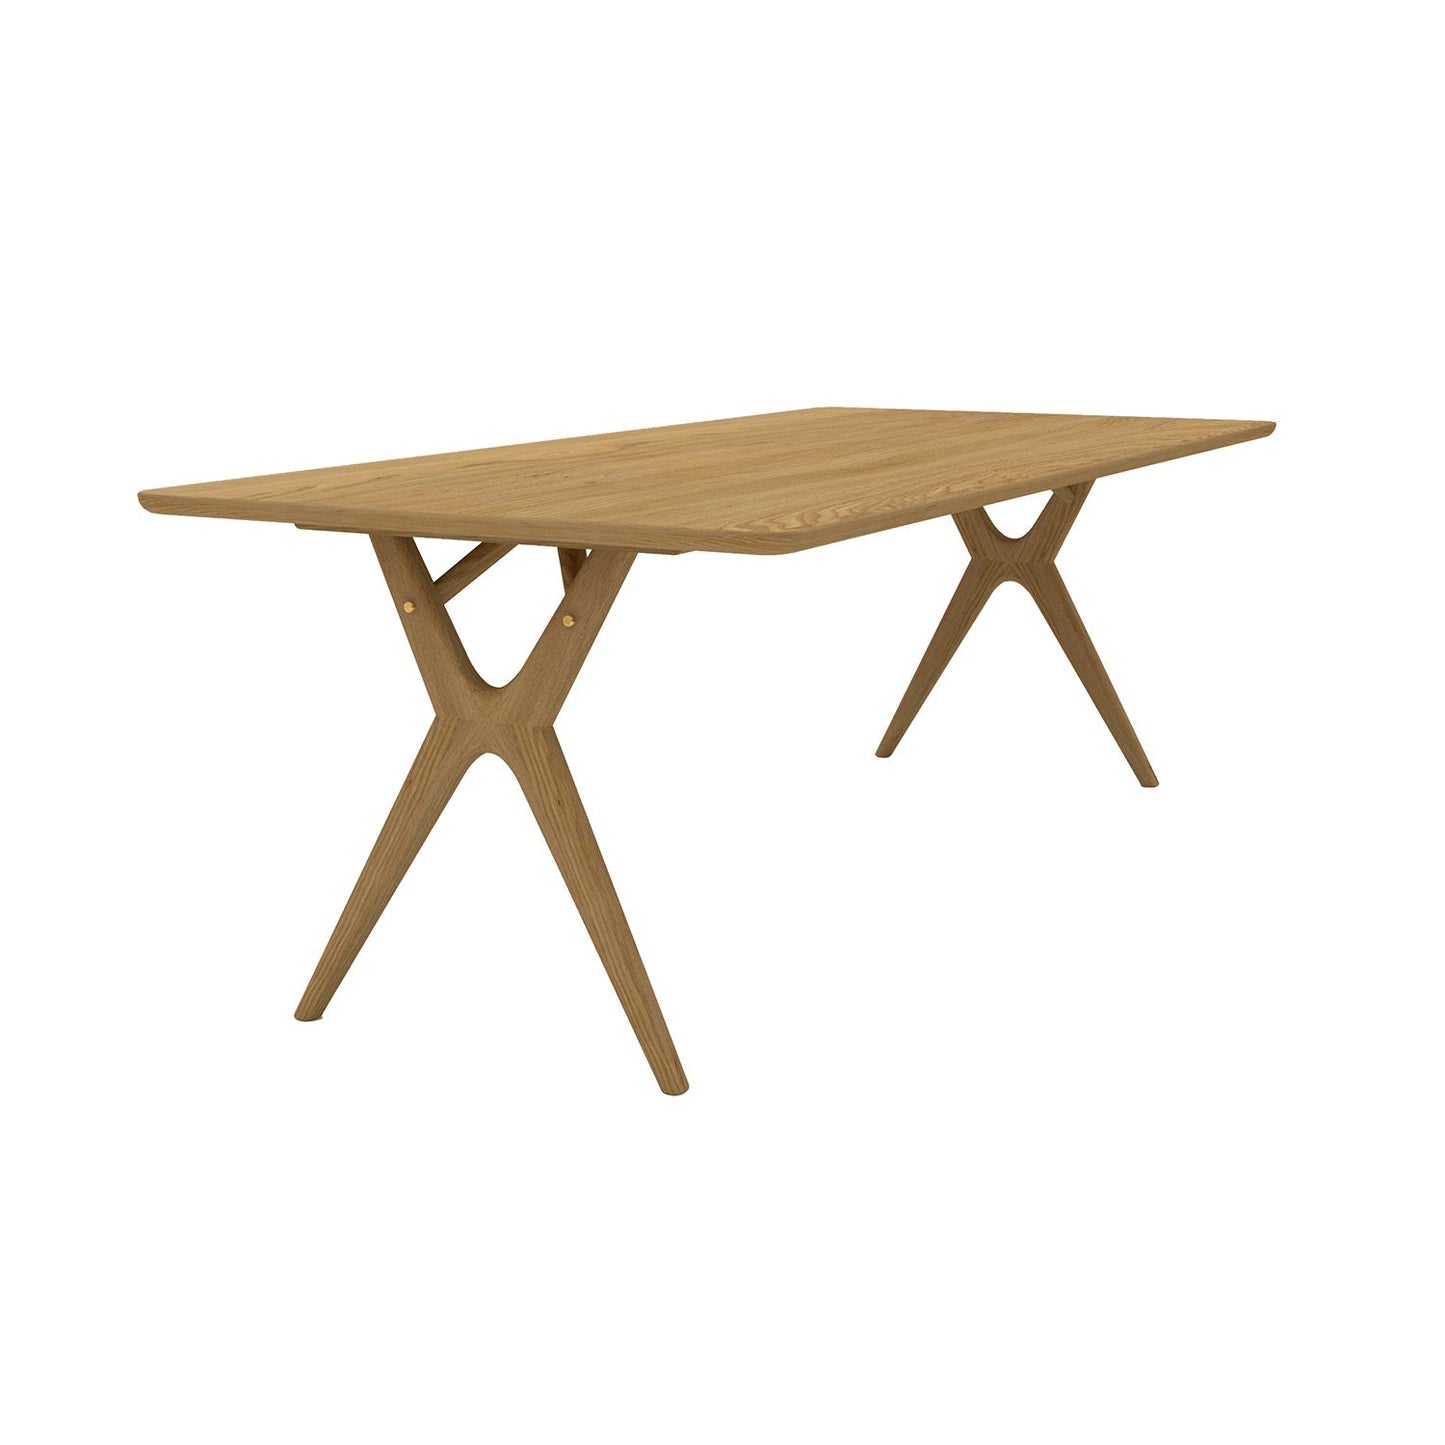 Rose Hill Oak Dining Table With Rounded Corners With Brass - 280cm Extending